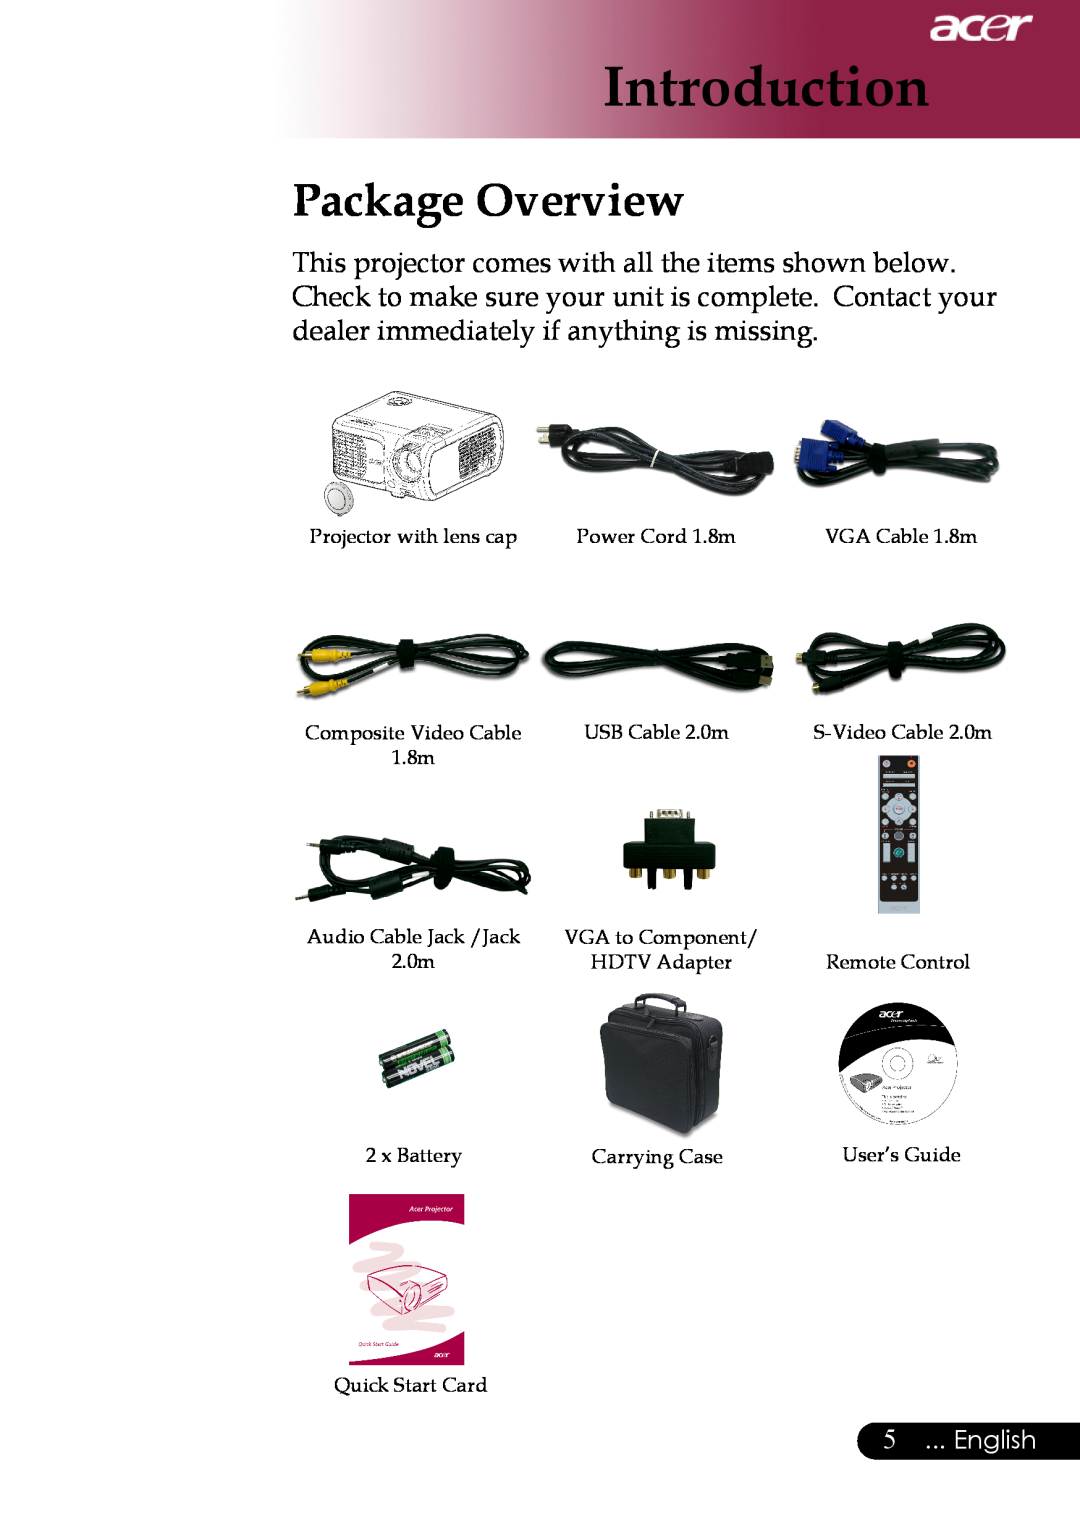 Acer XD1270 Package Overview, Introduction,  ... English, Projector with lens cap, Power Cord 1.8m, Composite Video Cable 